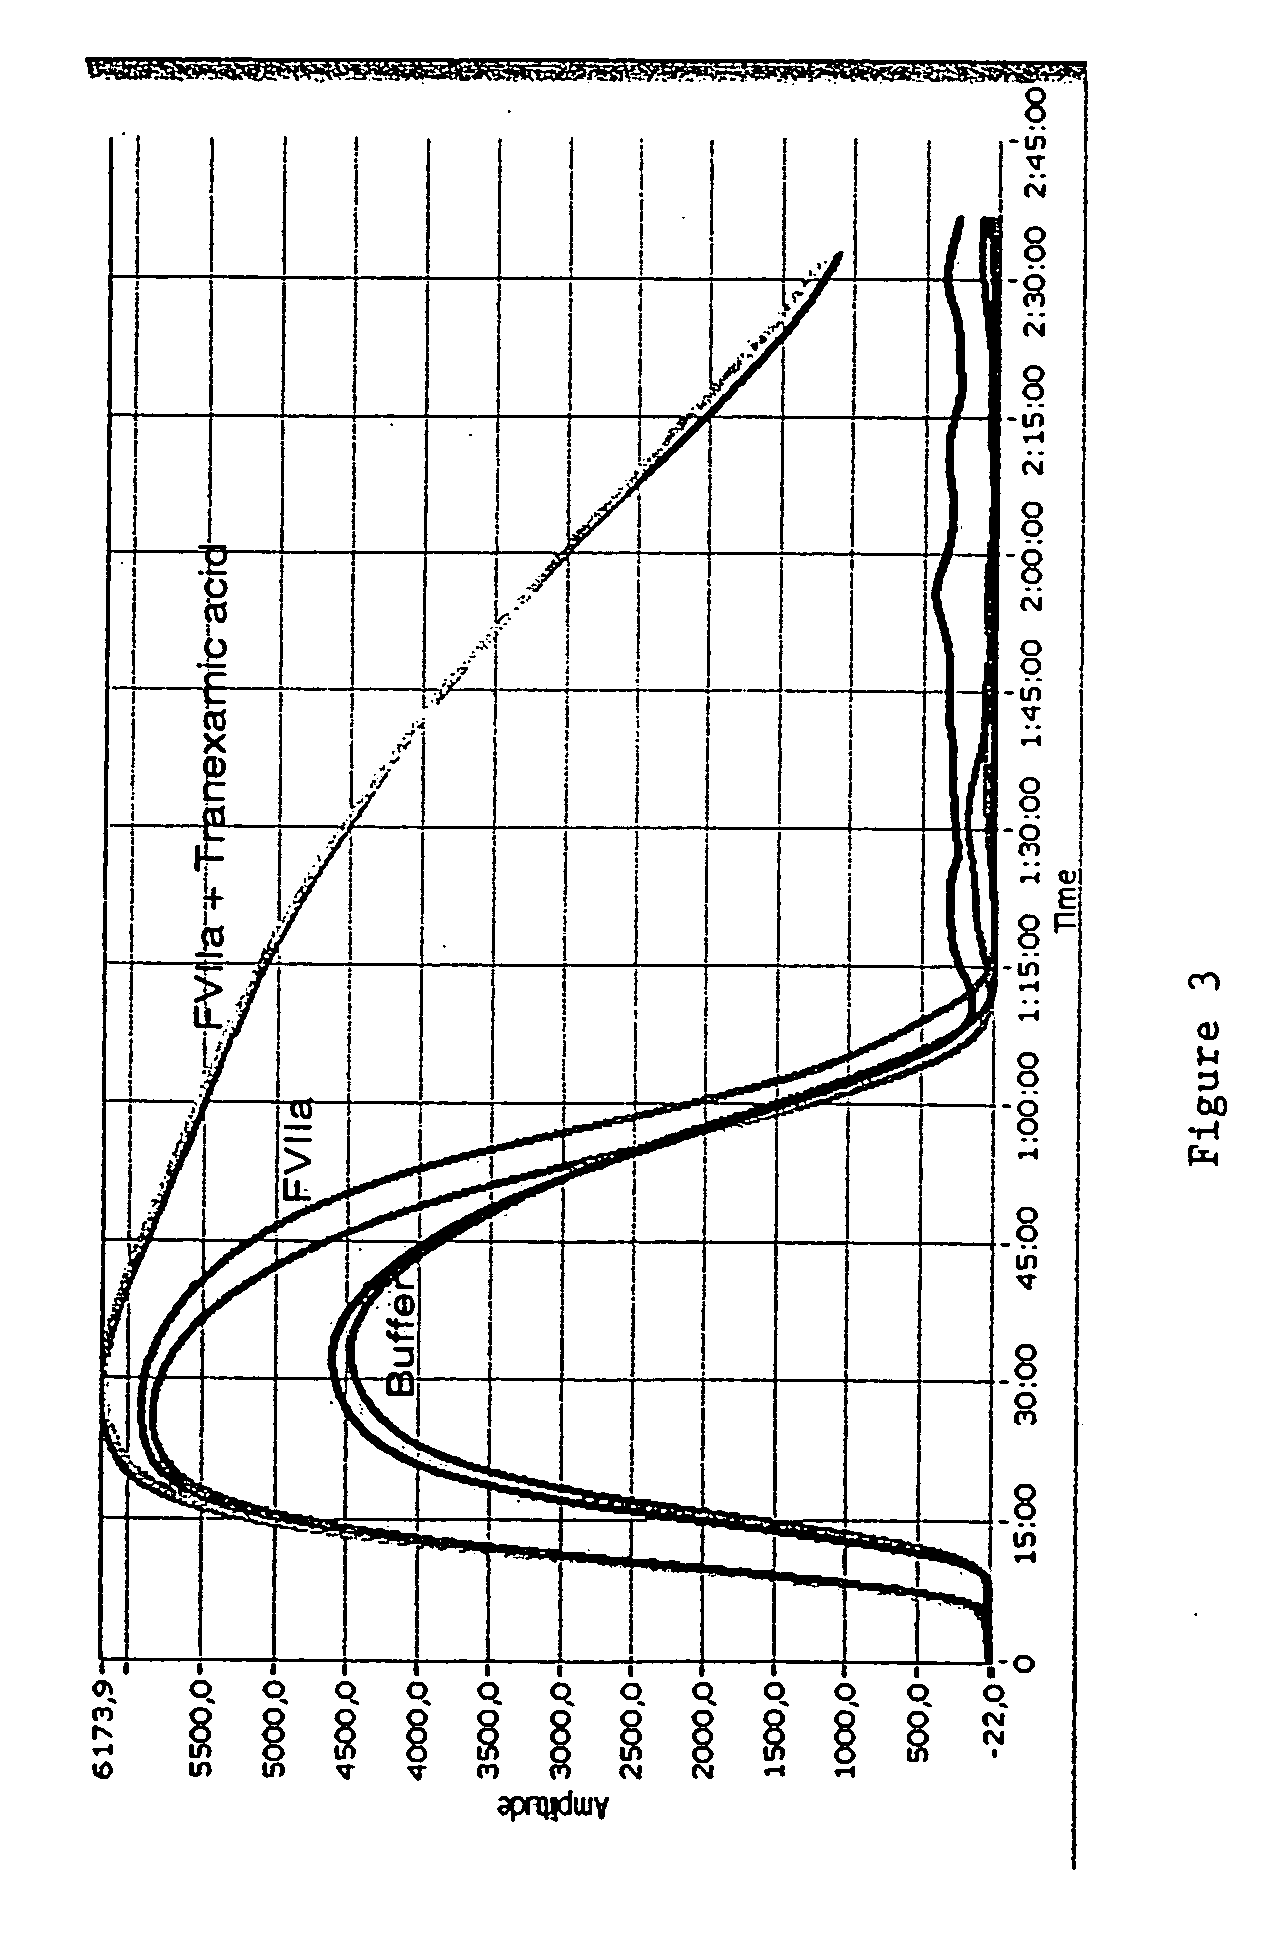 Pharmaceutical composition comprising factor VII polypeptides and tranexamic acid